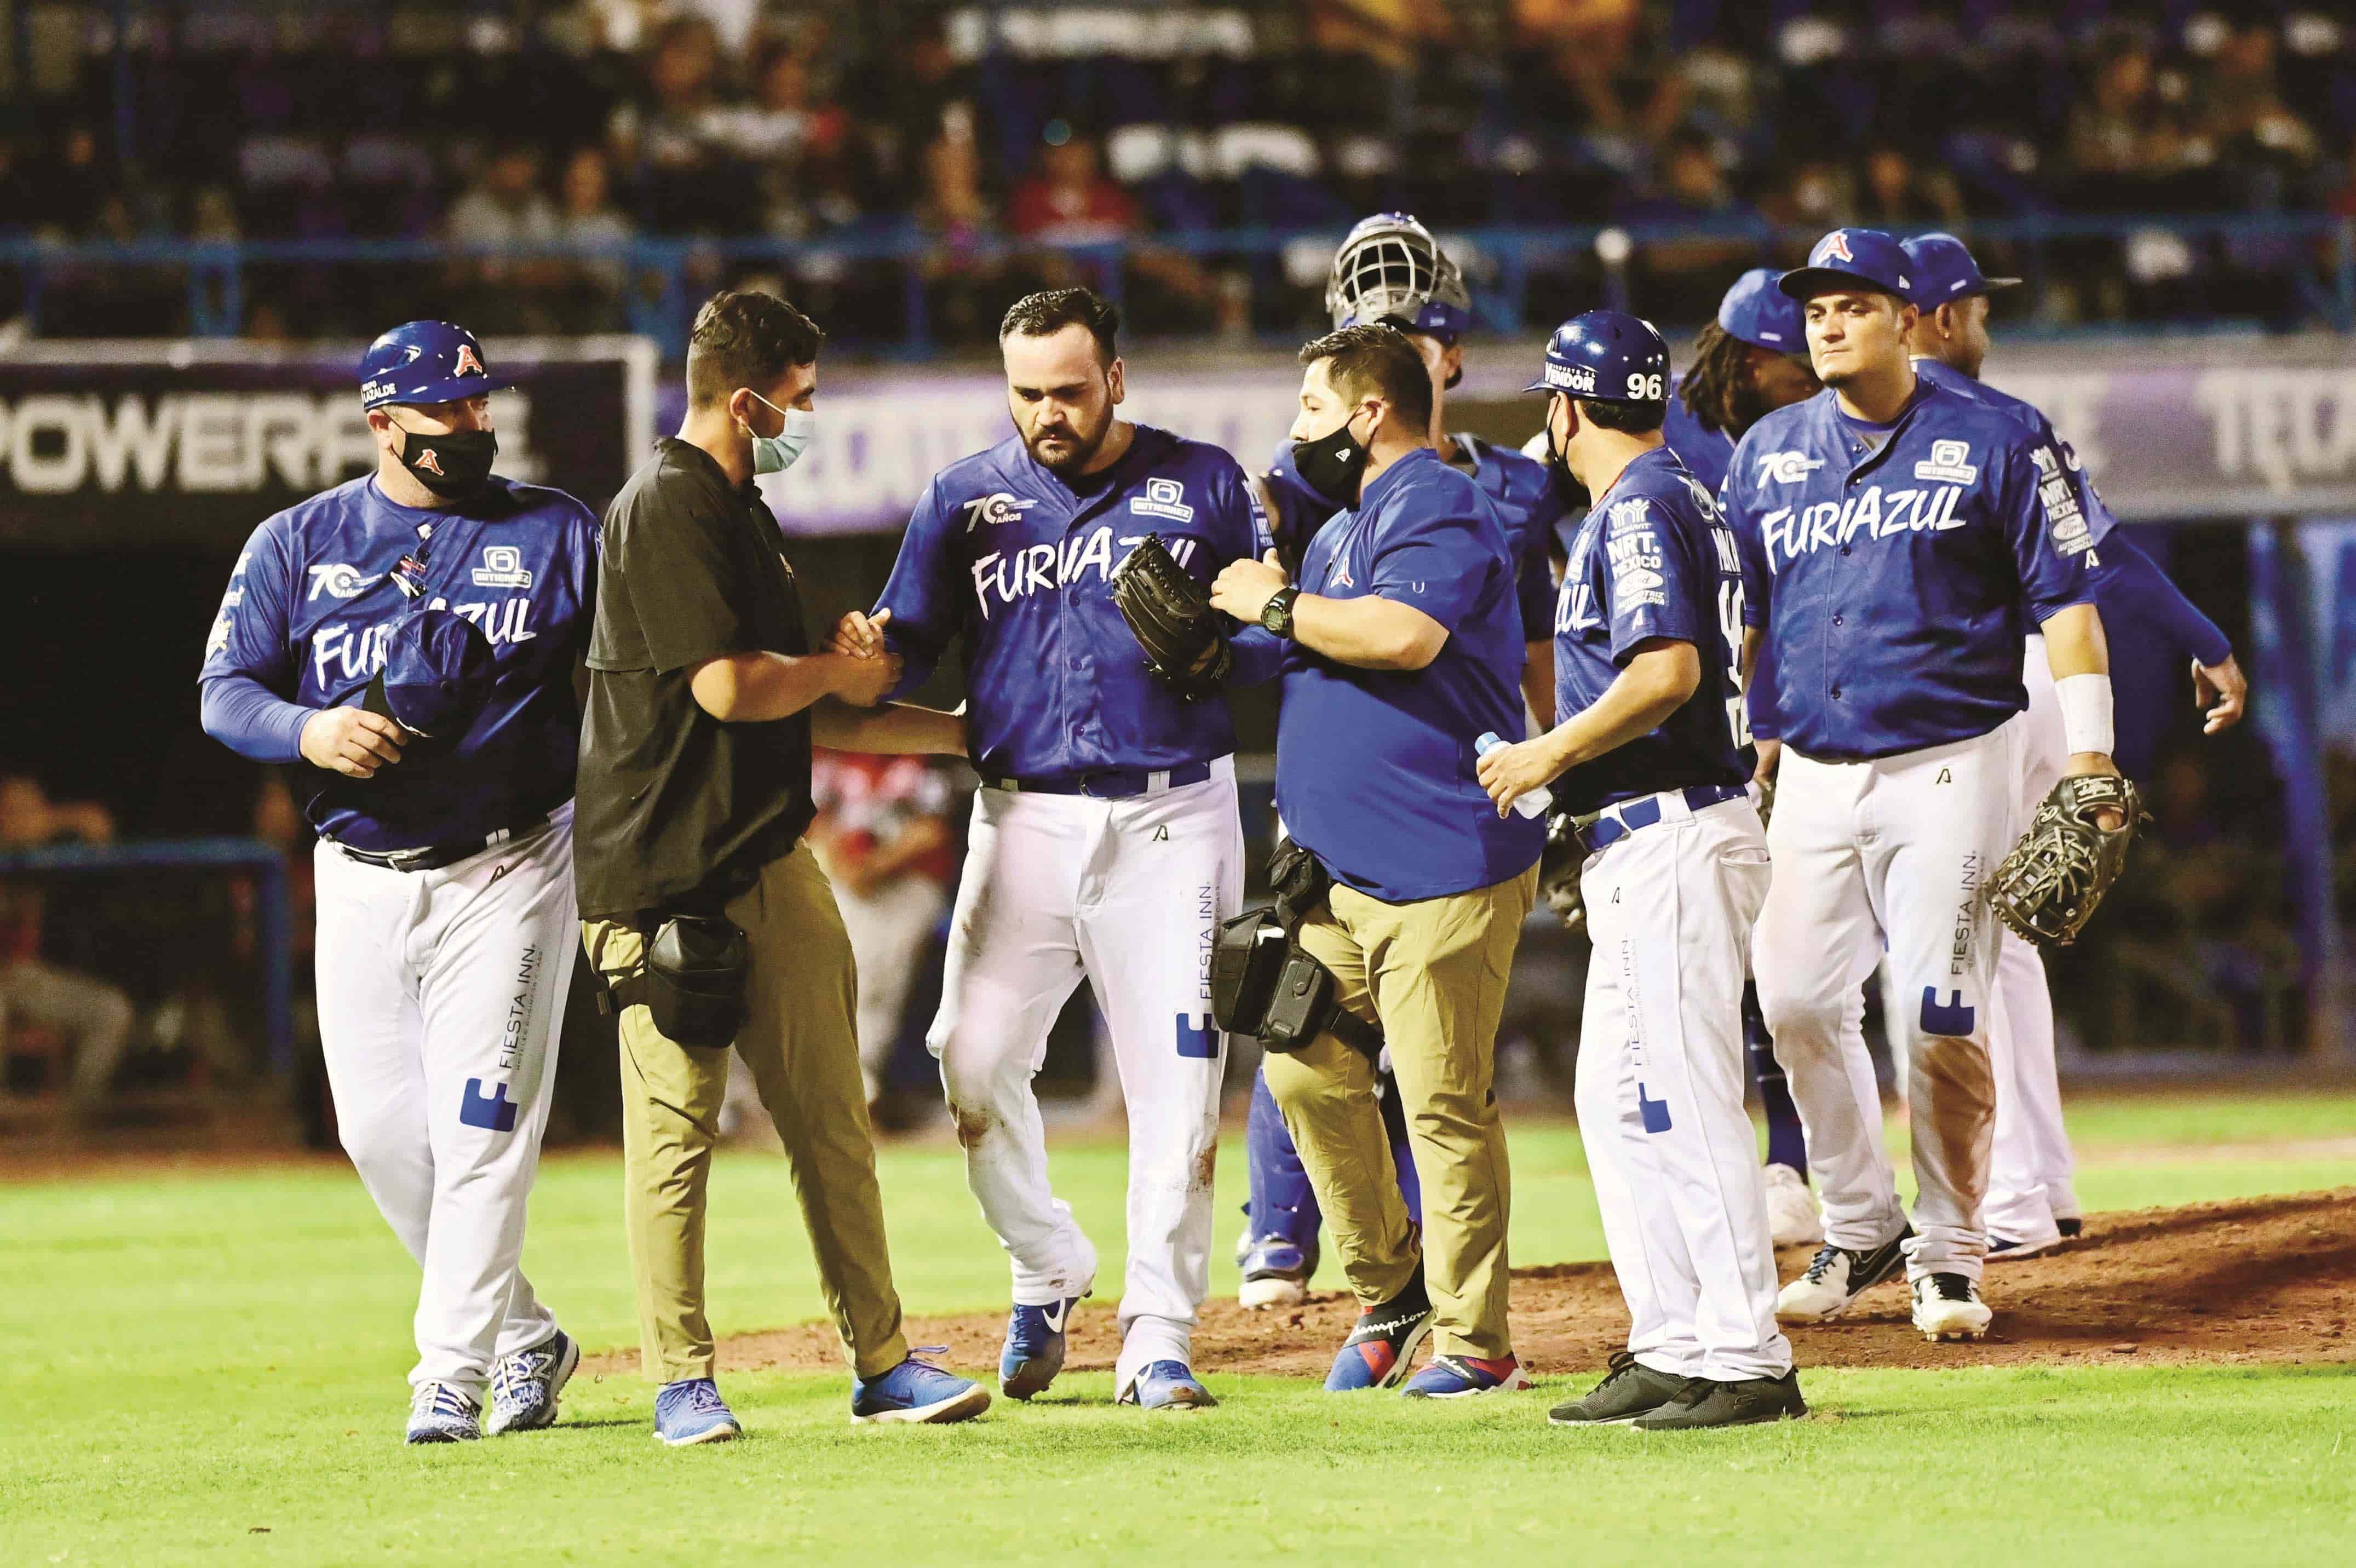 Doble golpe a Sultanes